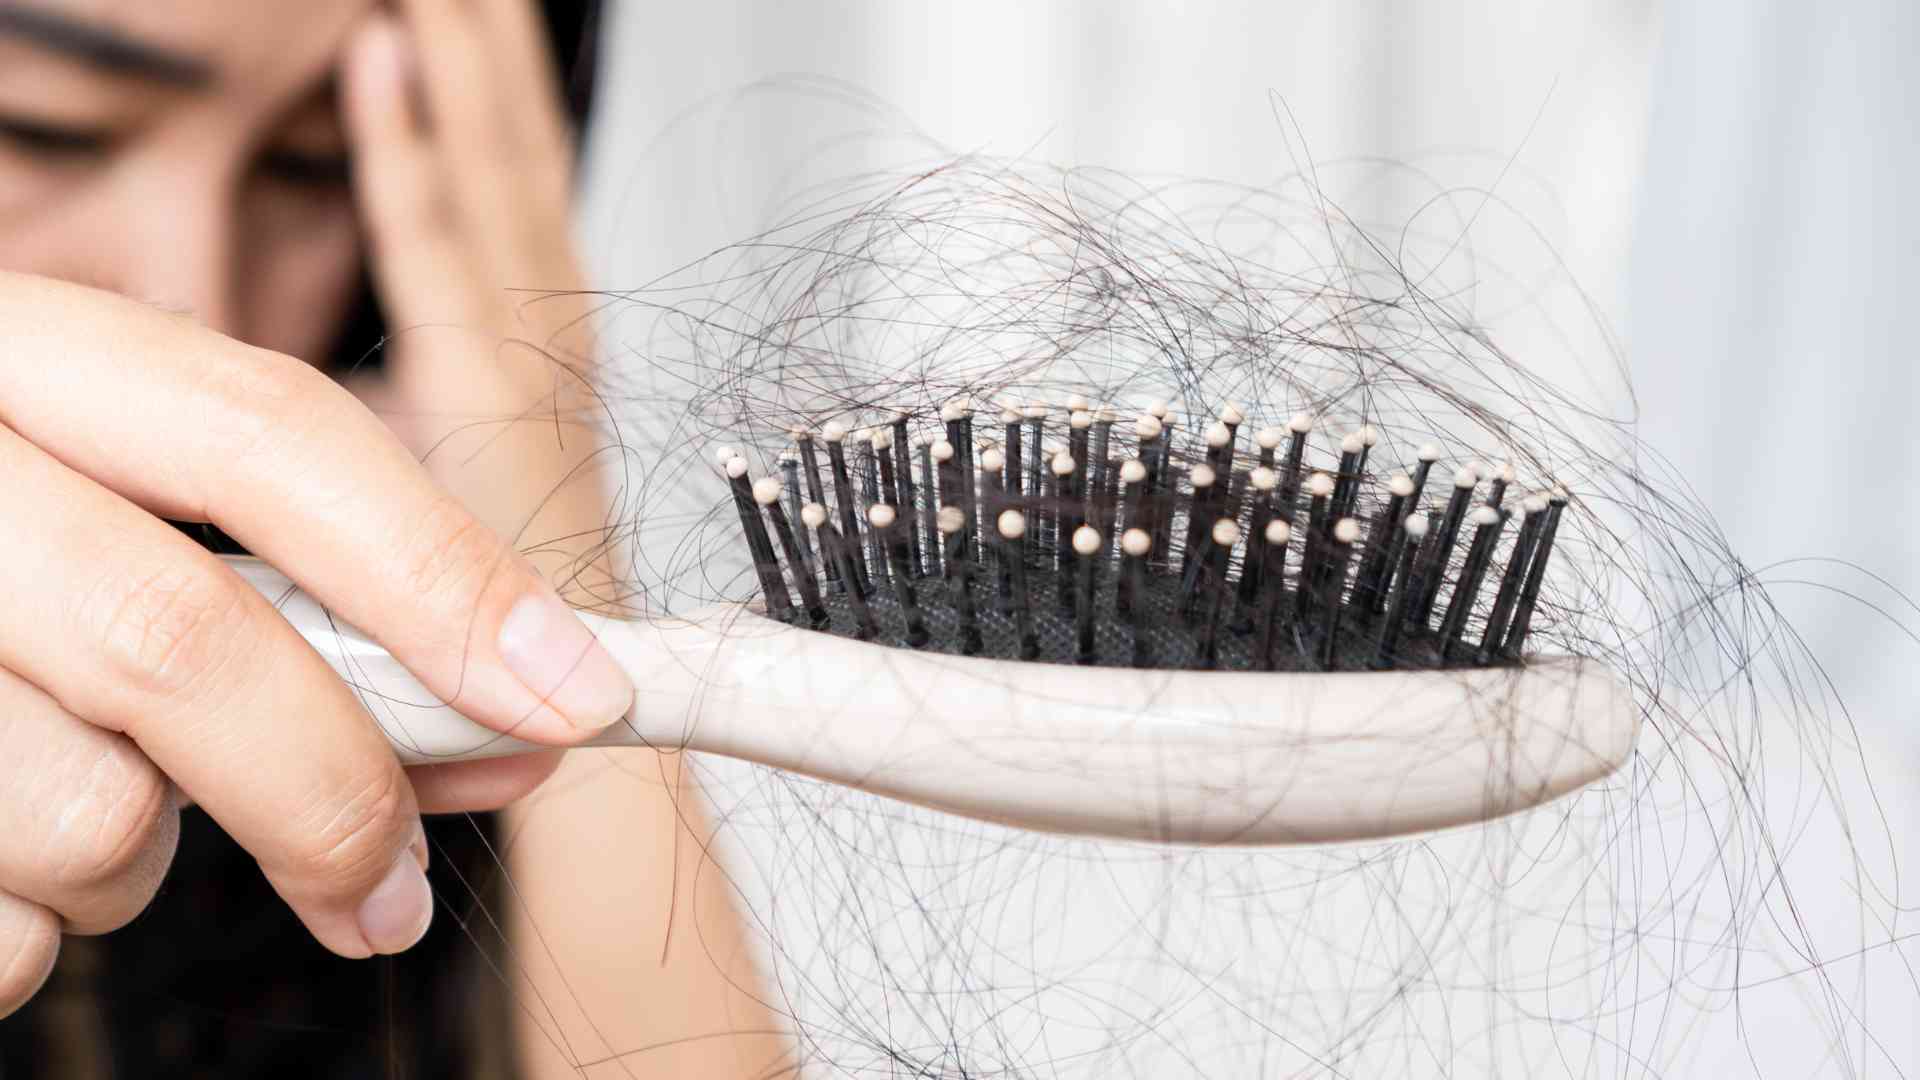 Can hair loss be a symptom of an underlying medical condition